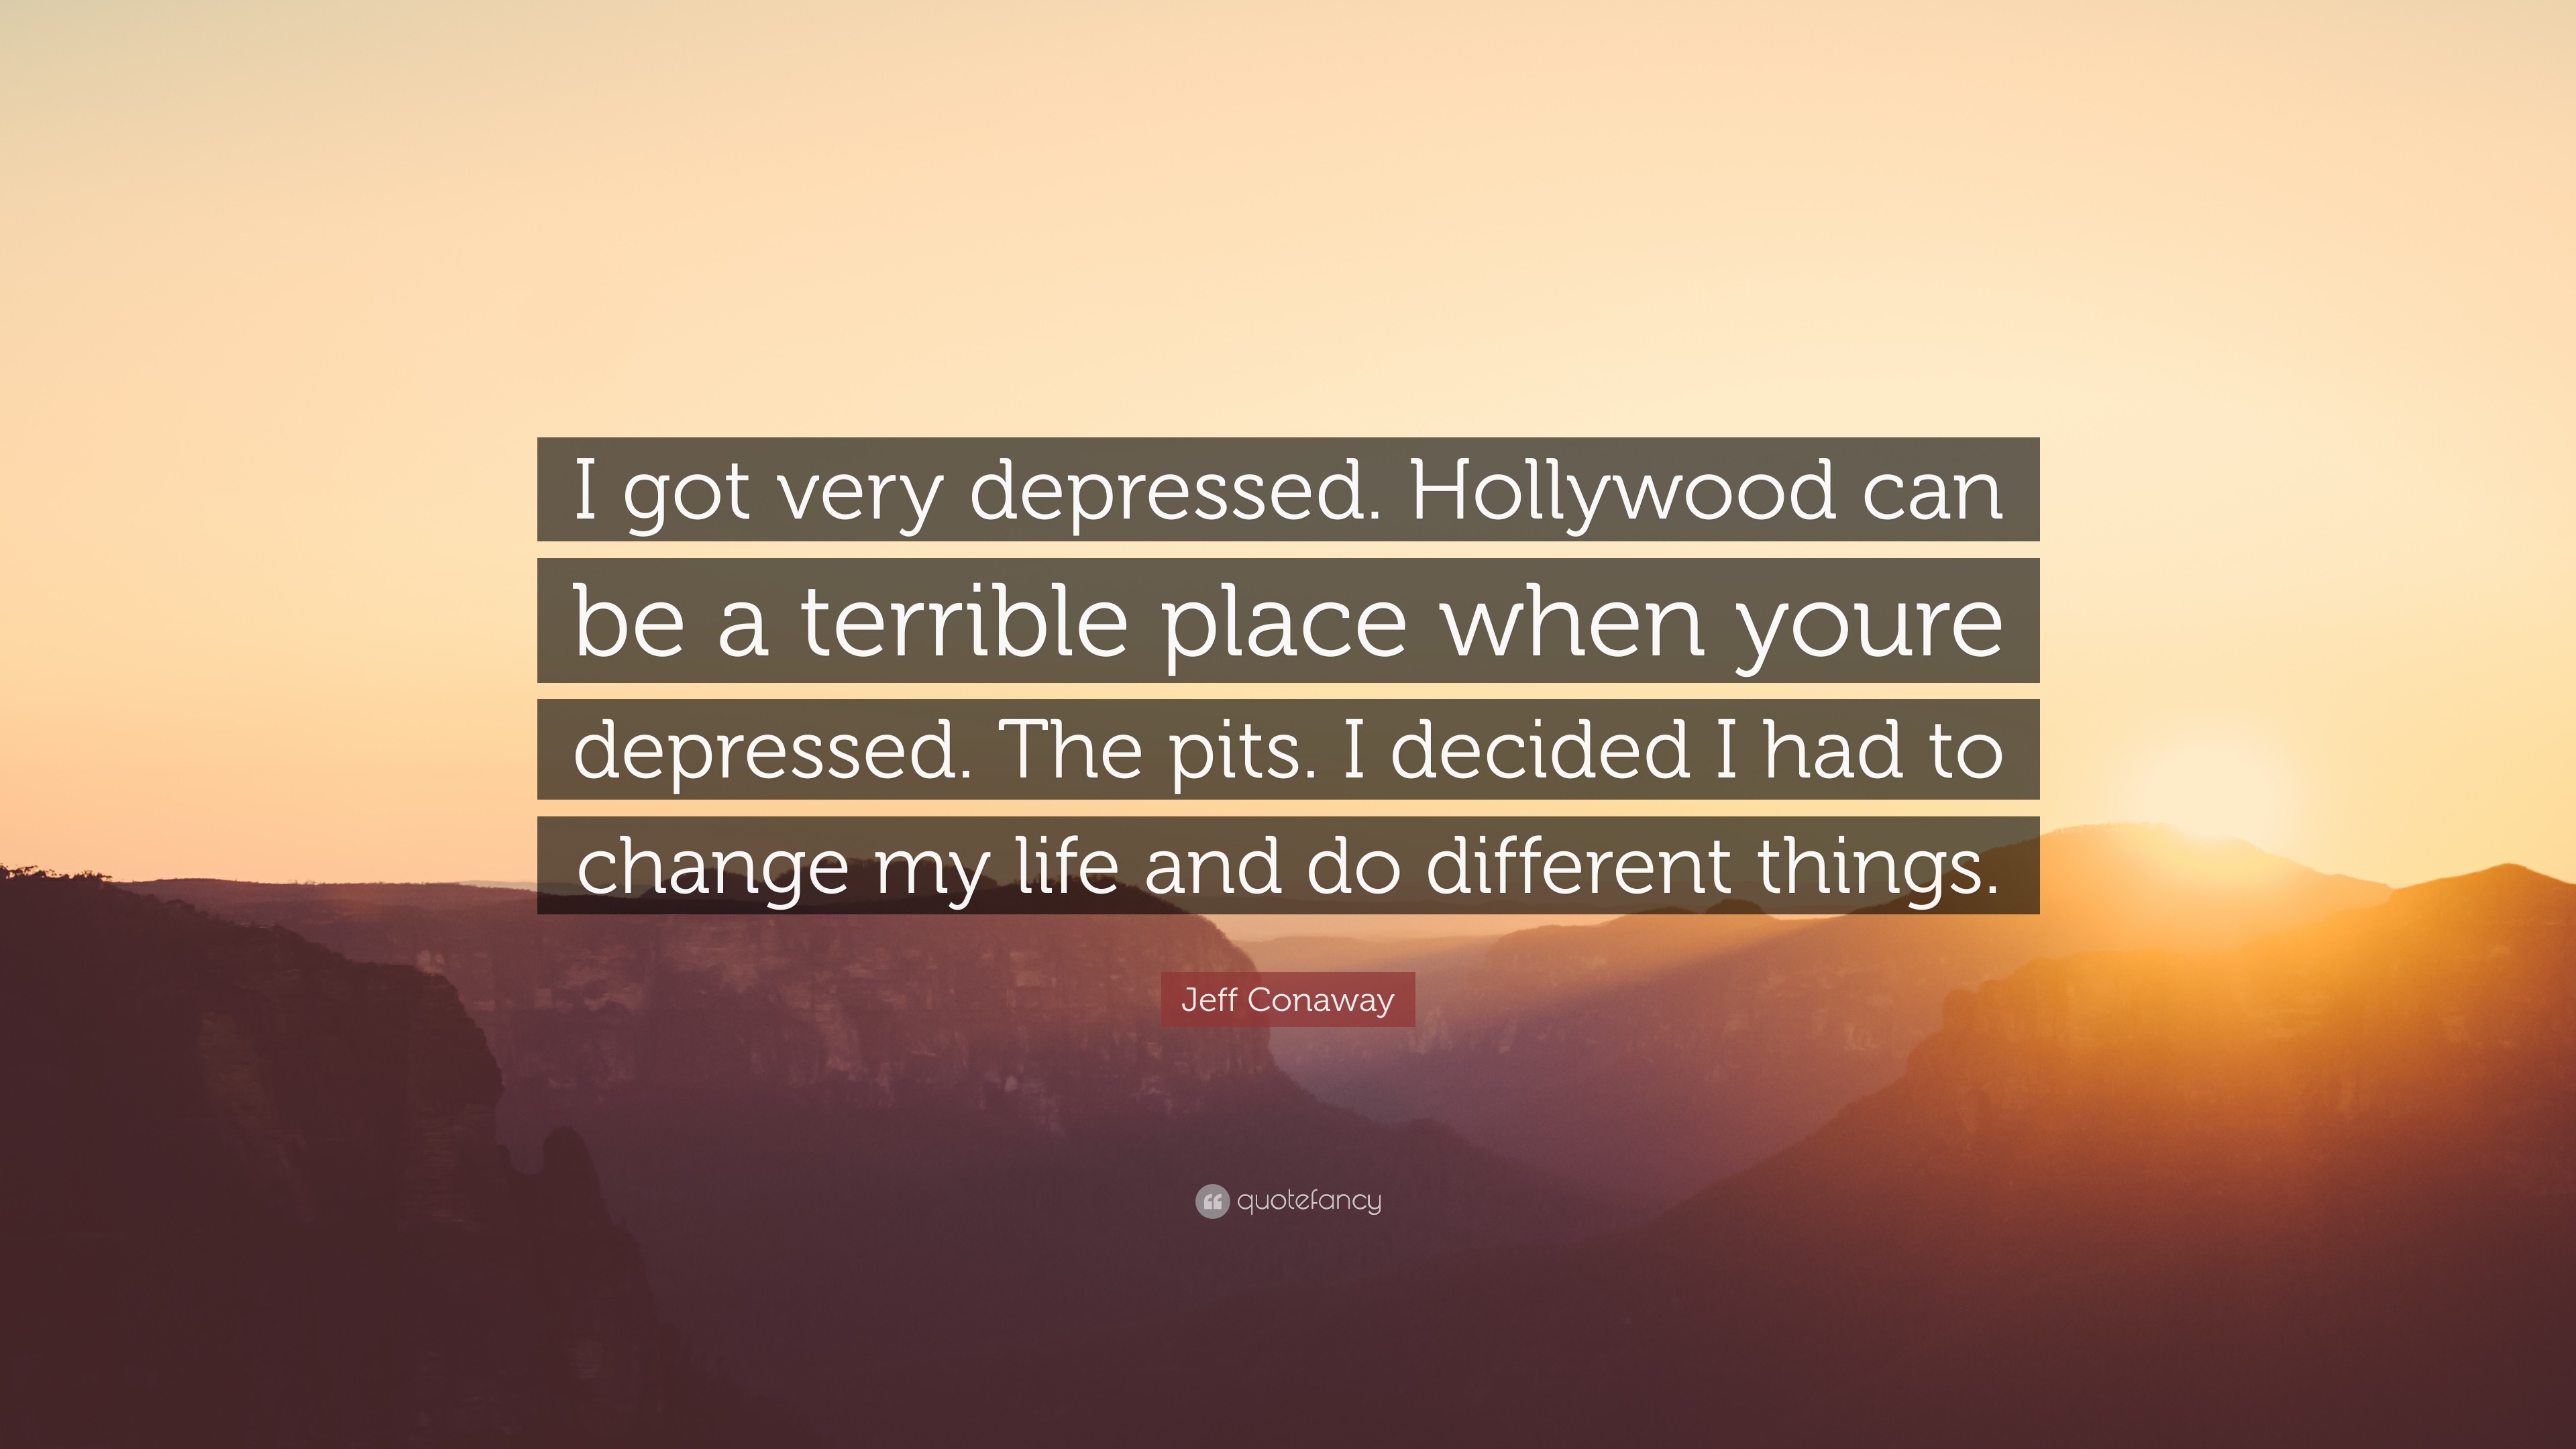 3840x2160 Jeff Conaway Quote: “I got very depressed. Hollywood can be a terrible place